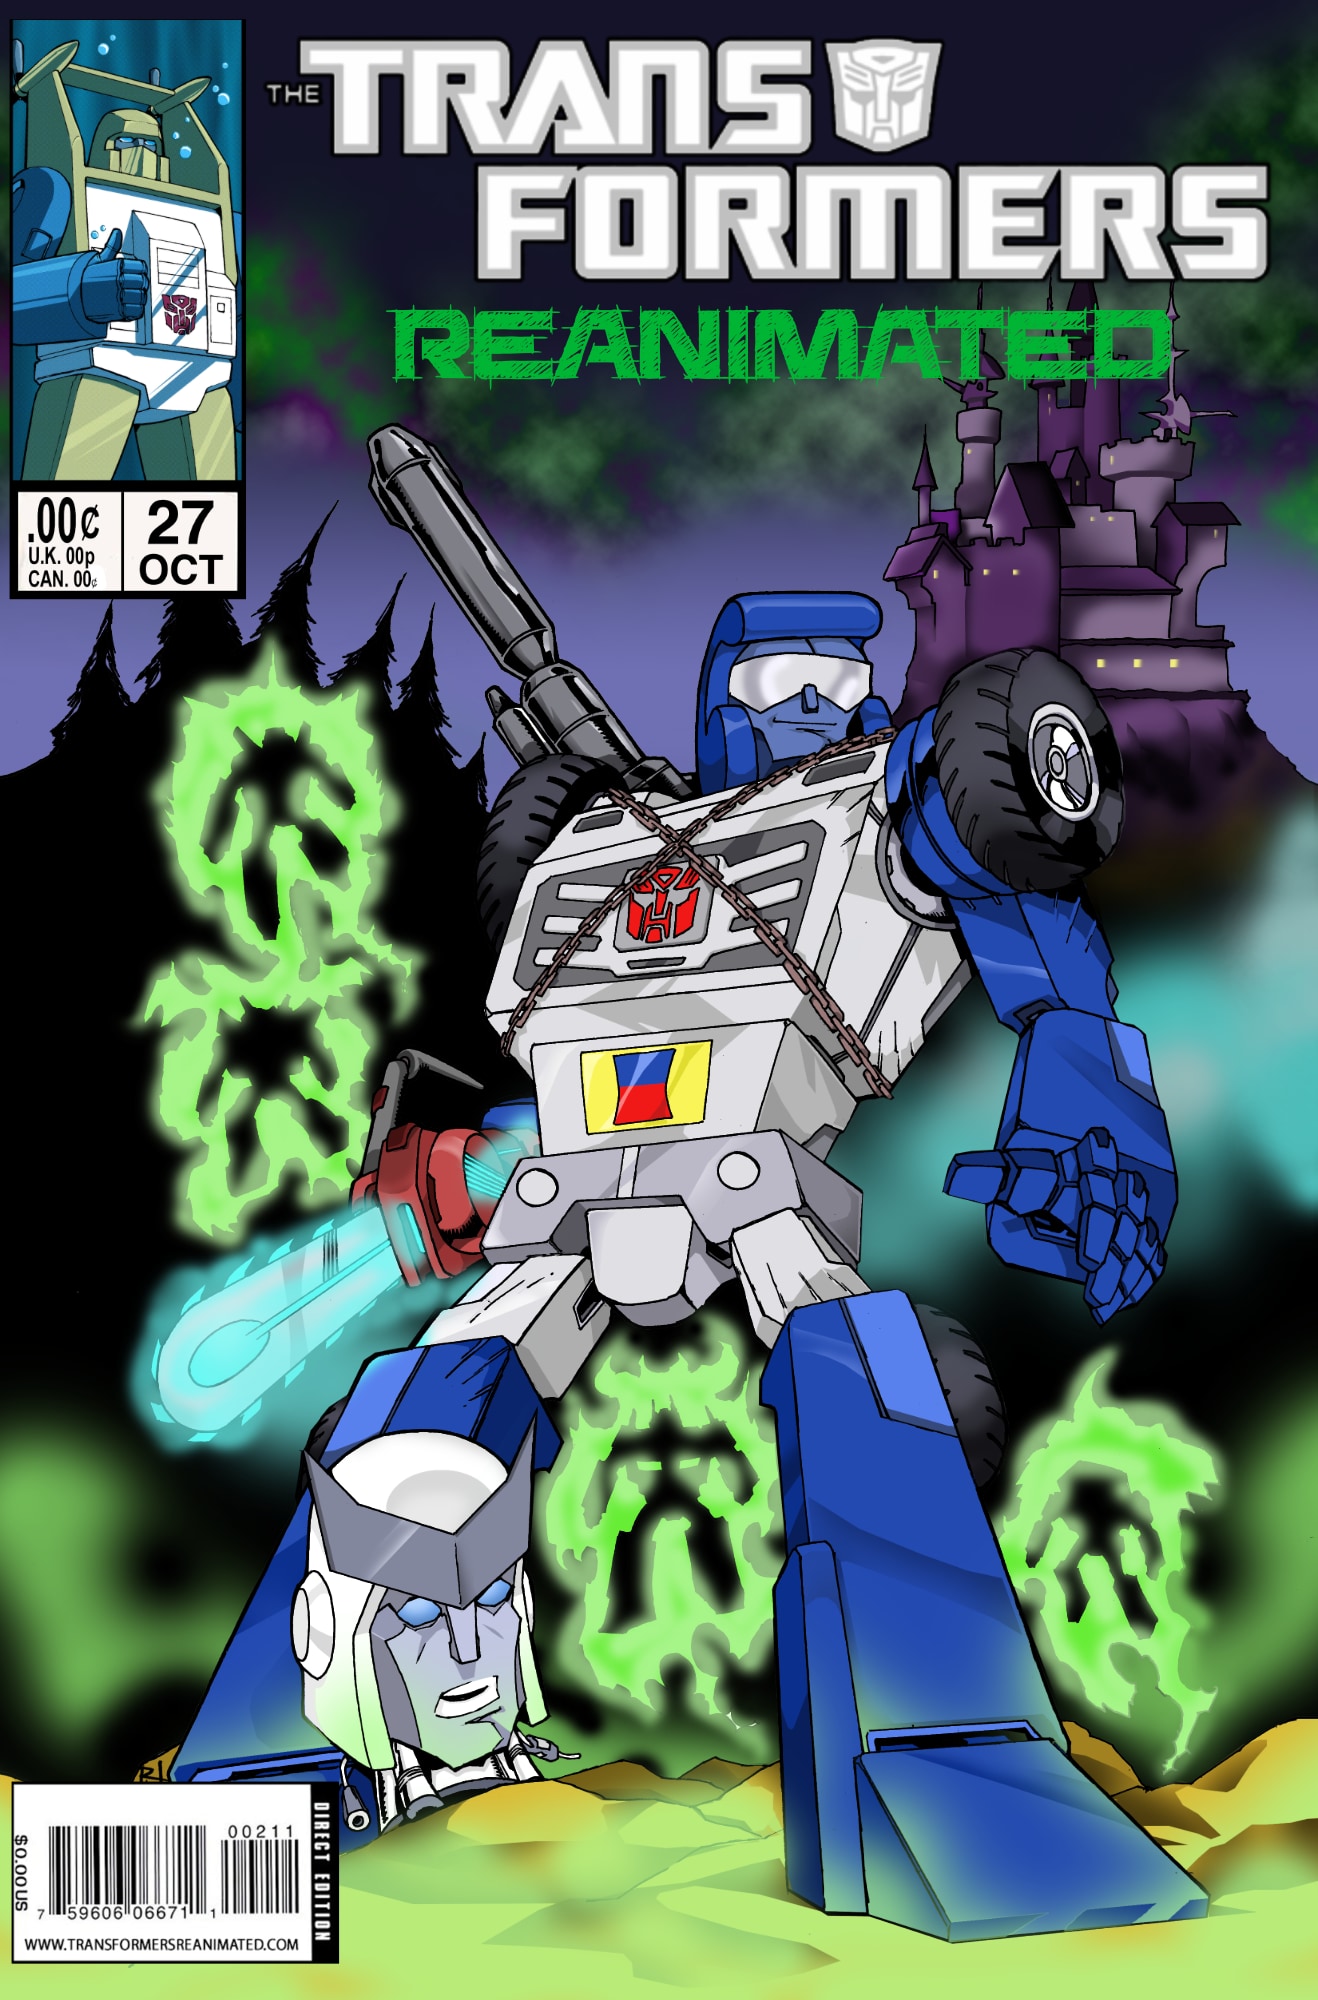 Transformers comic cover with Beachcomber holding a chainsaw